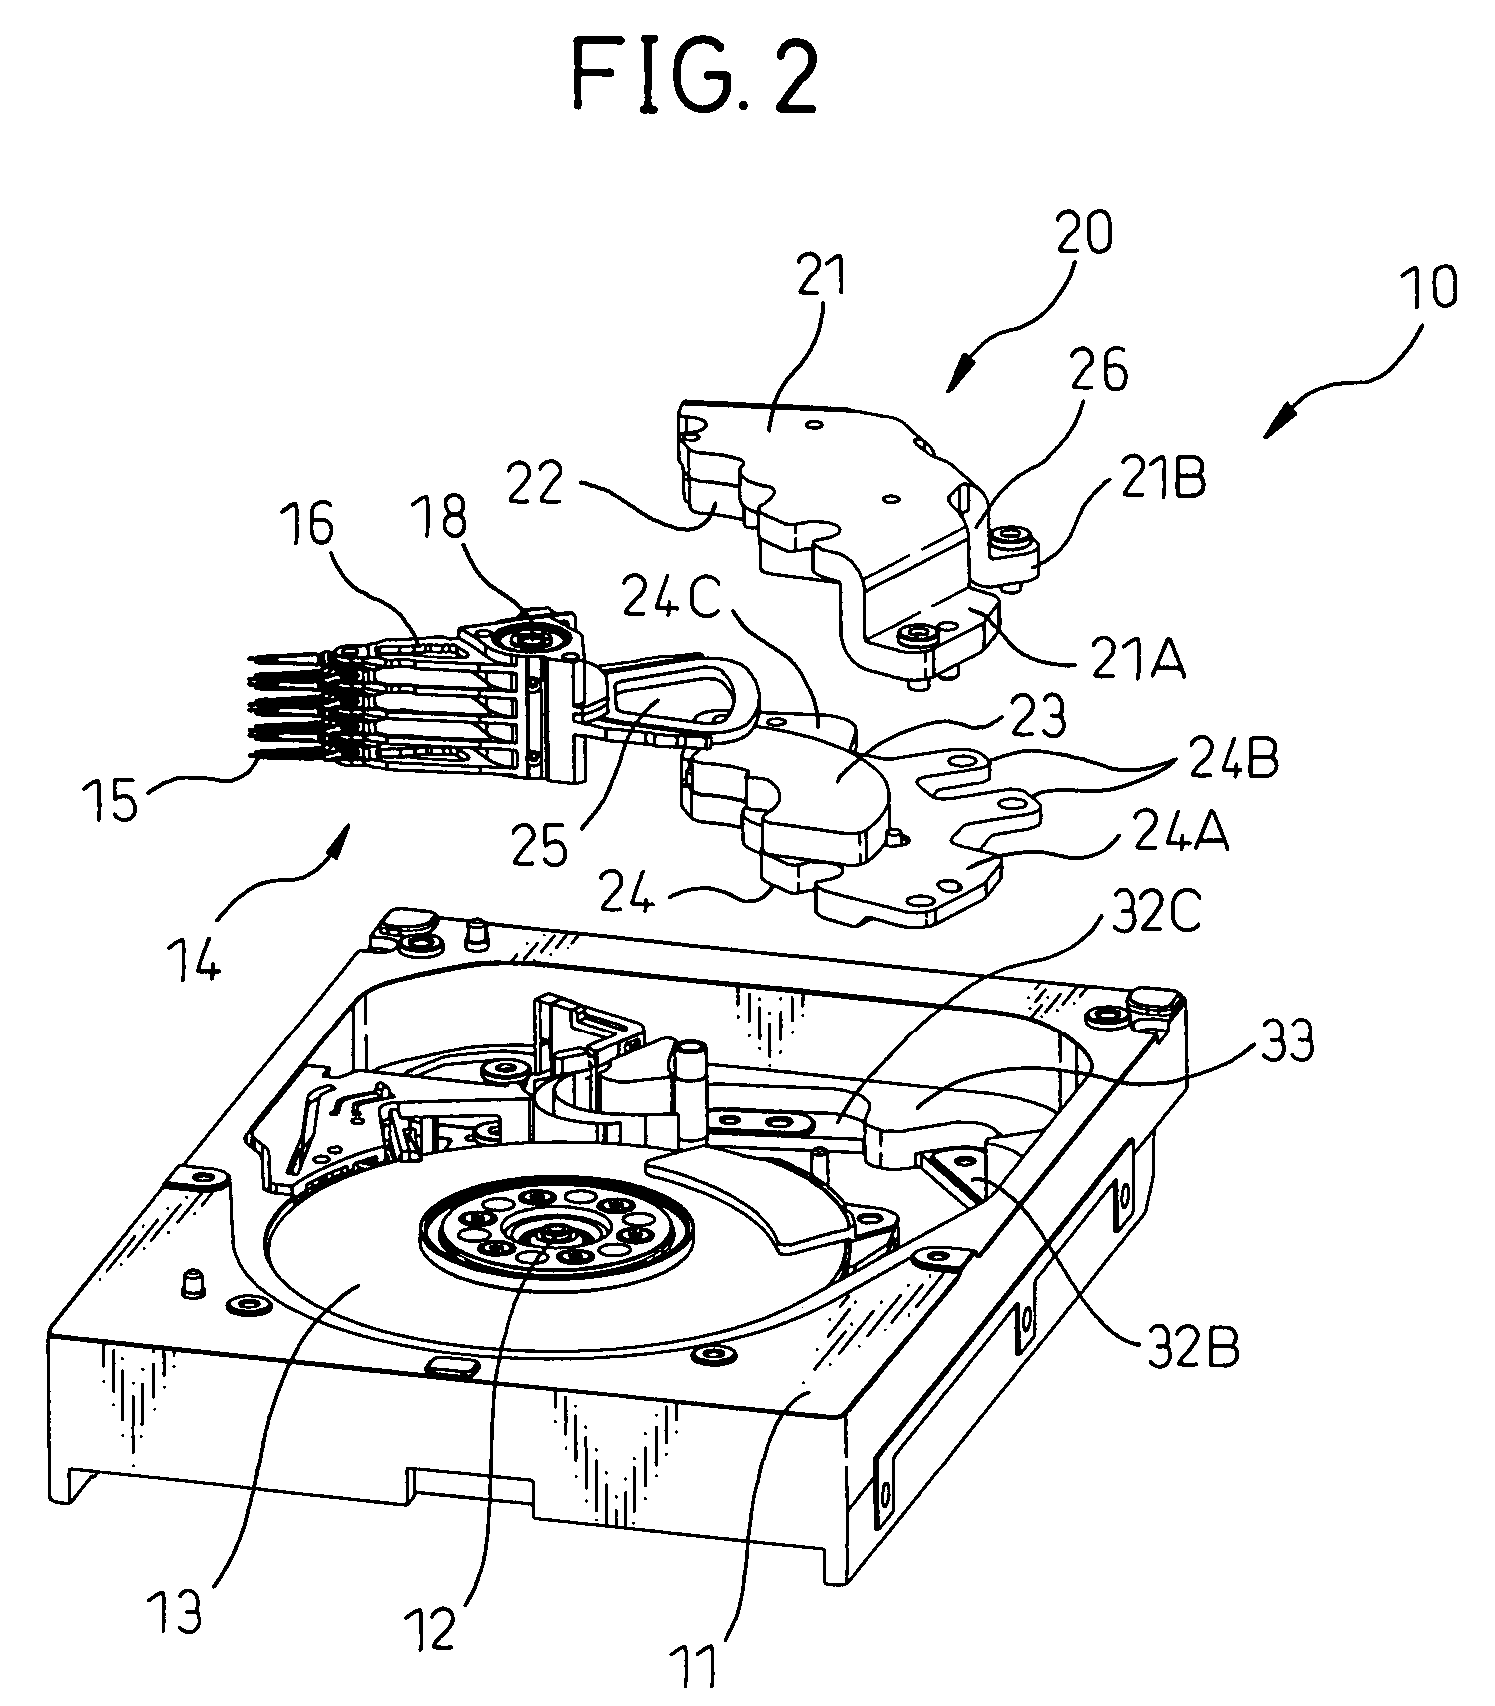 Cooling of head actuator of disk device